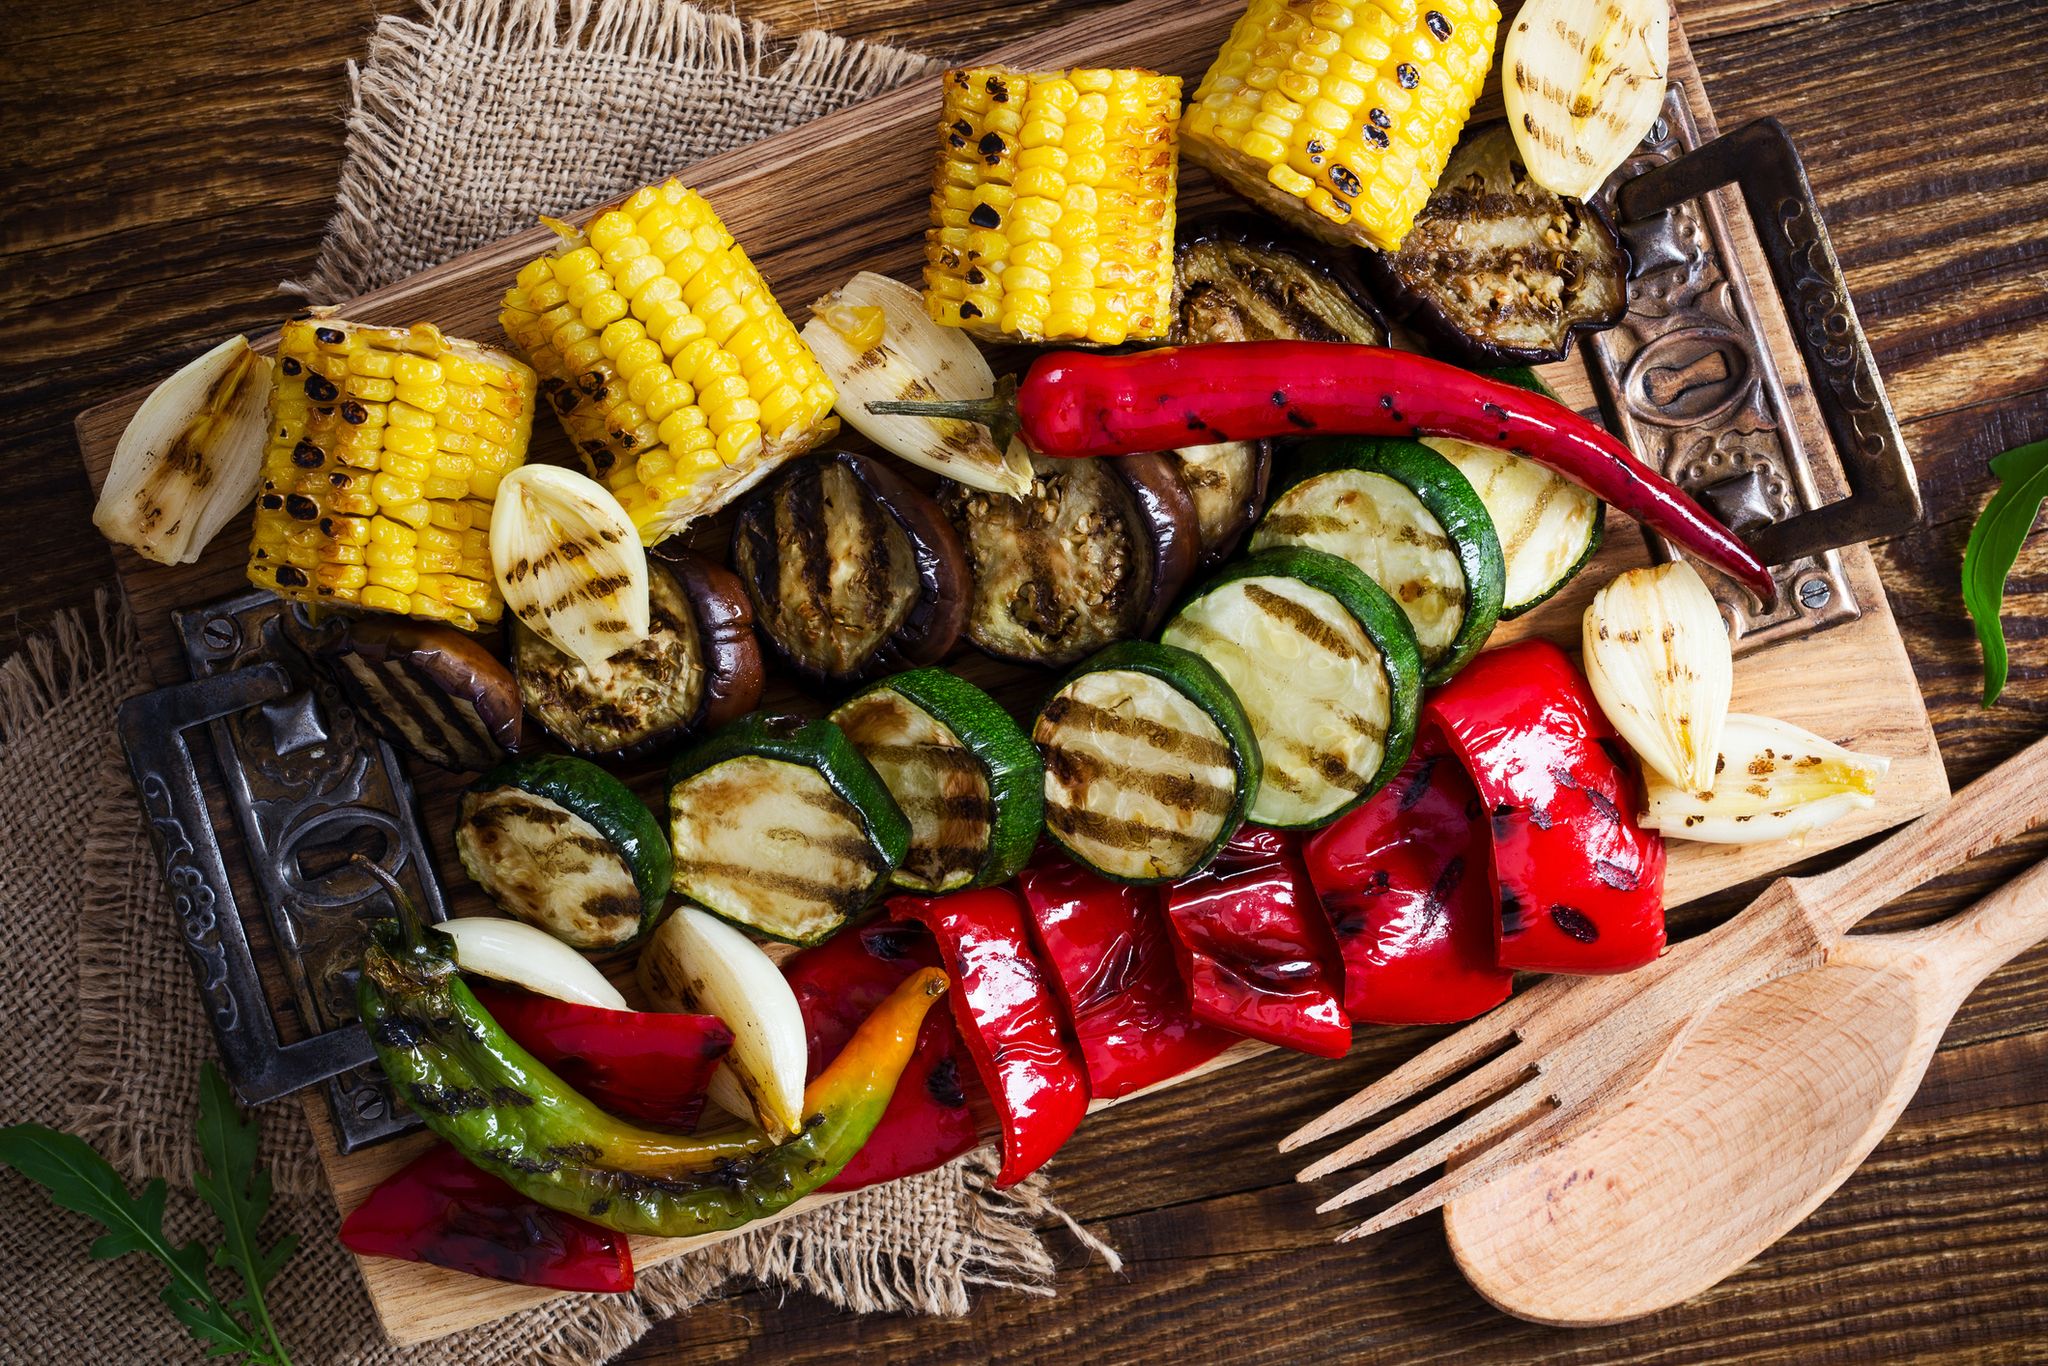 https://hips.hearstapps.com/hmg-prod/images/homemade-organic-grilled-summer-vegetables-on-royalty-free-image-1575029202.jpg?crop=0.99953xw:1xh;center,top&resize=2048:*